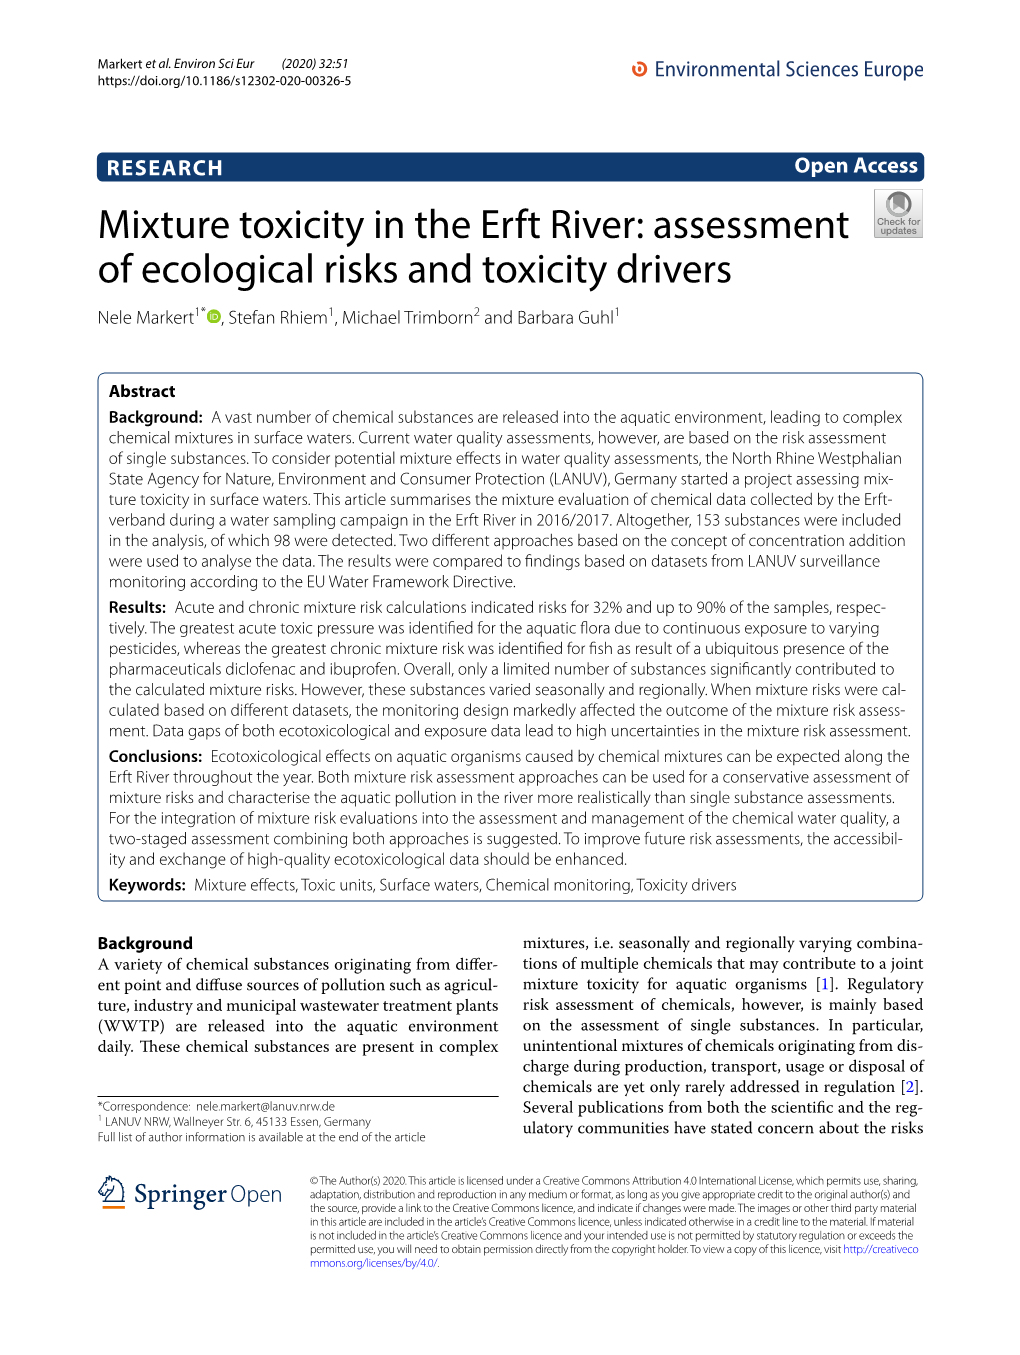 Mixture Toxicity in the Erft River: Assessment of Ecological Risks and Toxicity Drivers Nele Markert1* , Stefan Rhiem1, Michael Trimborn2 and Barbara Guhl1